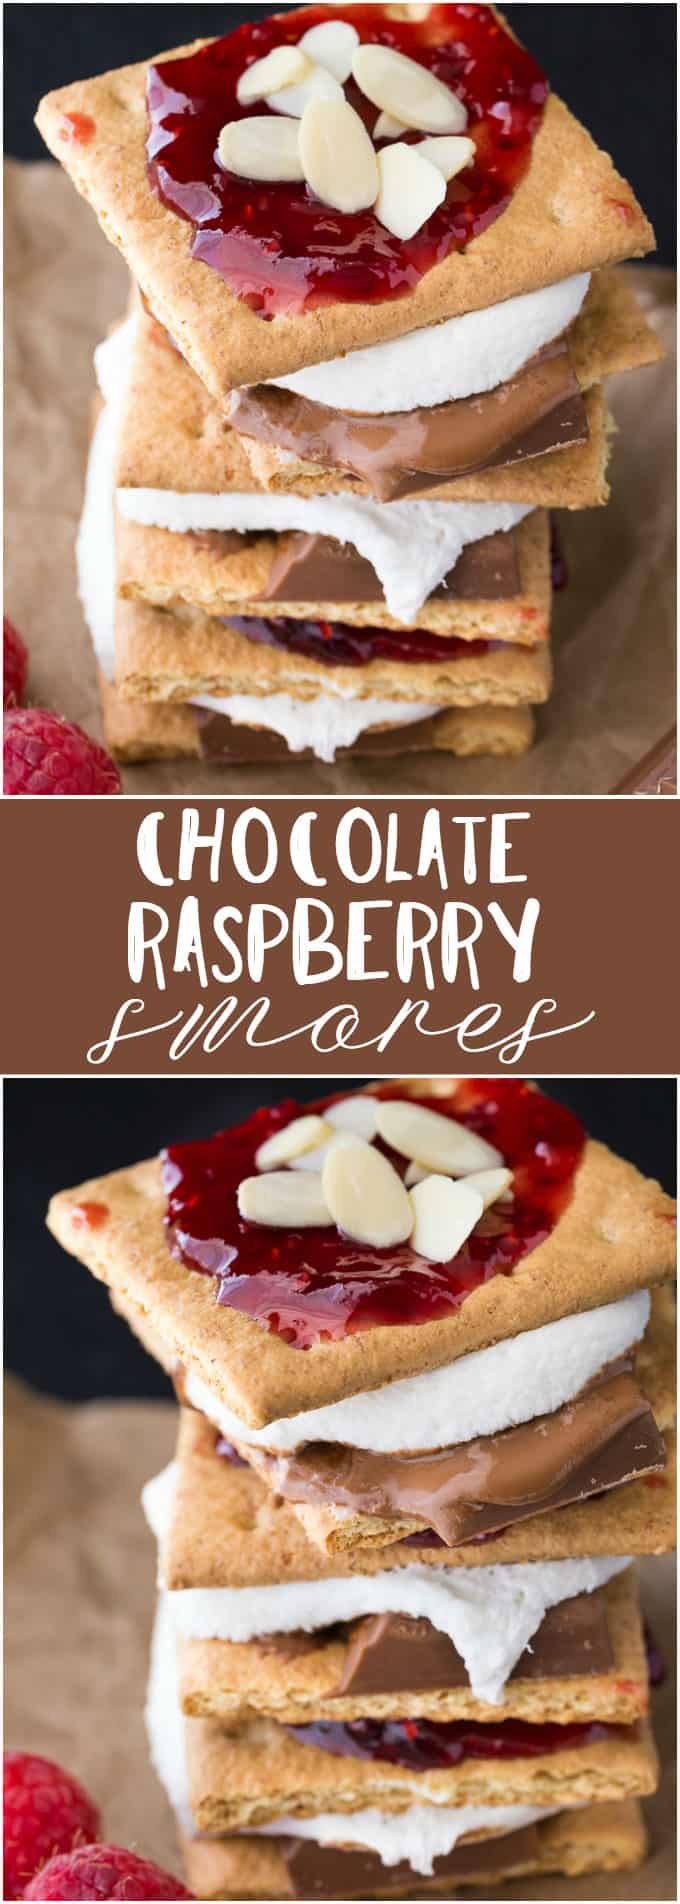 Chocolate Raspberry S'mores - These simple sweet treats are a great way to dress up the campfire. With all the s'mores flavours you love, along with sweet raspberry jam and crunchy almonds, they take the traditional campfire treat to the next level!